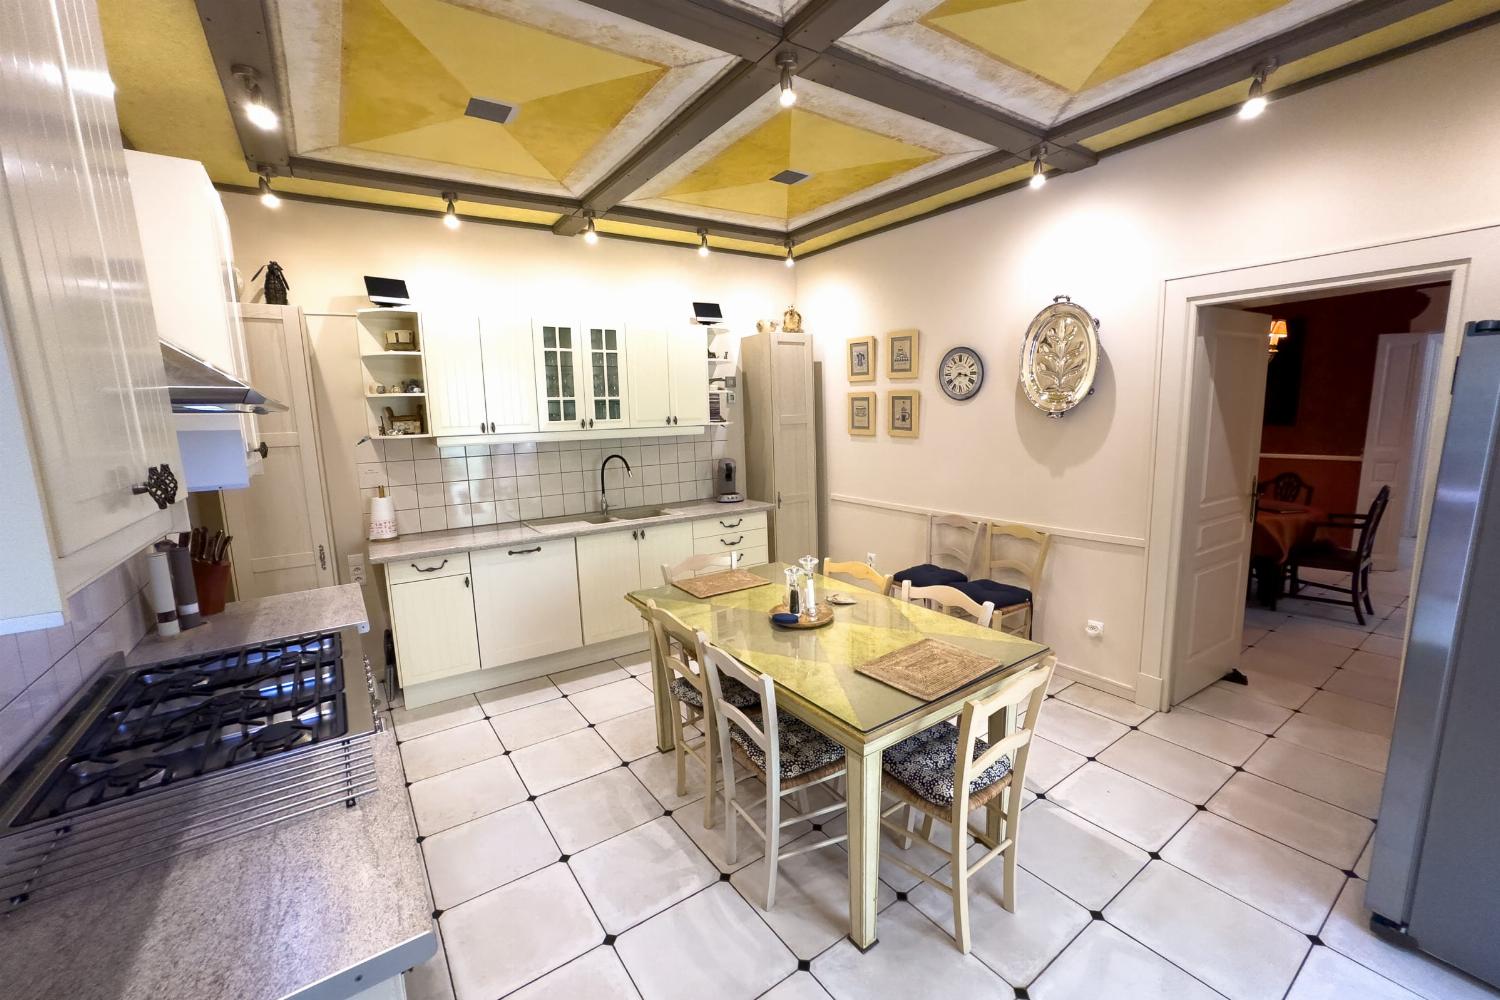 Kitchen | Holiday home in the South of France